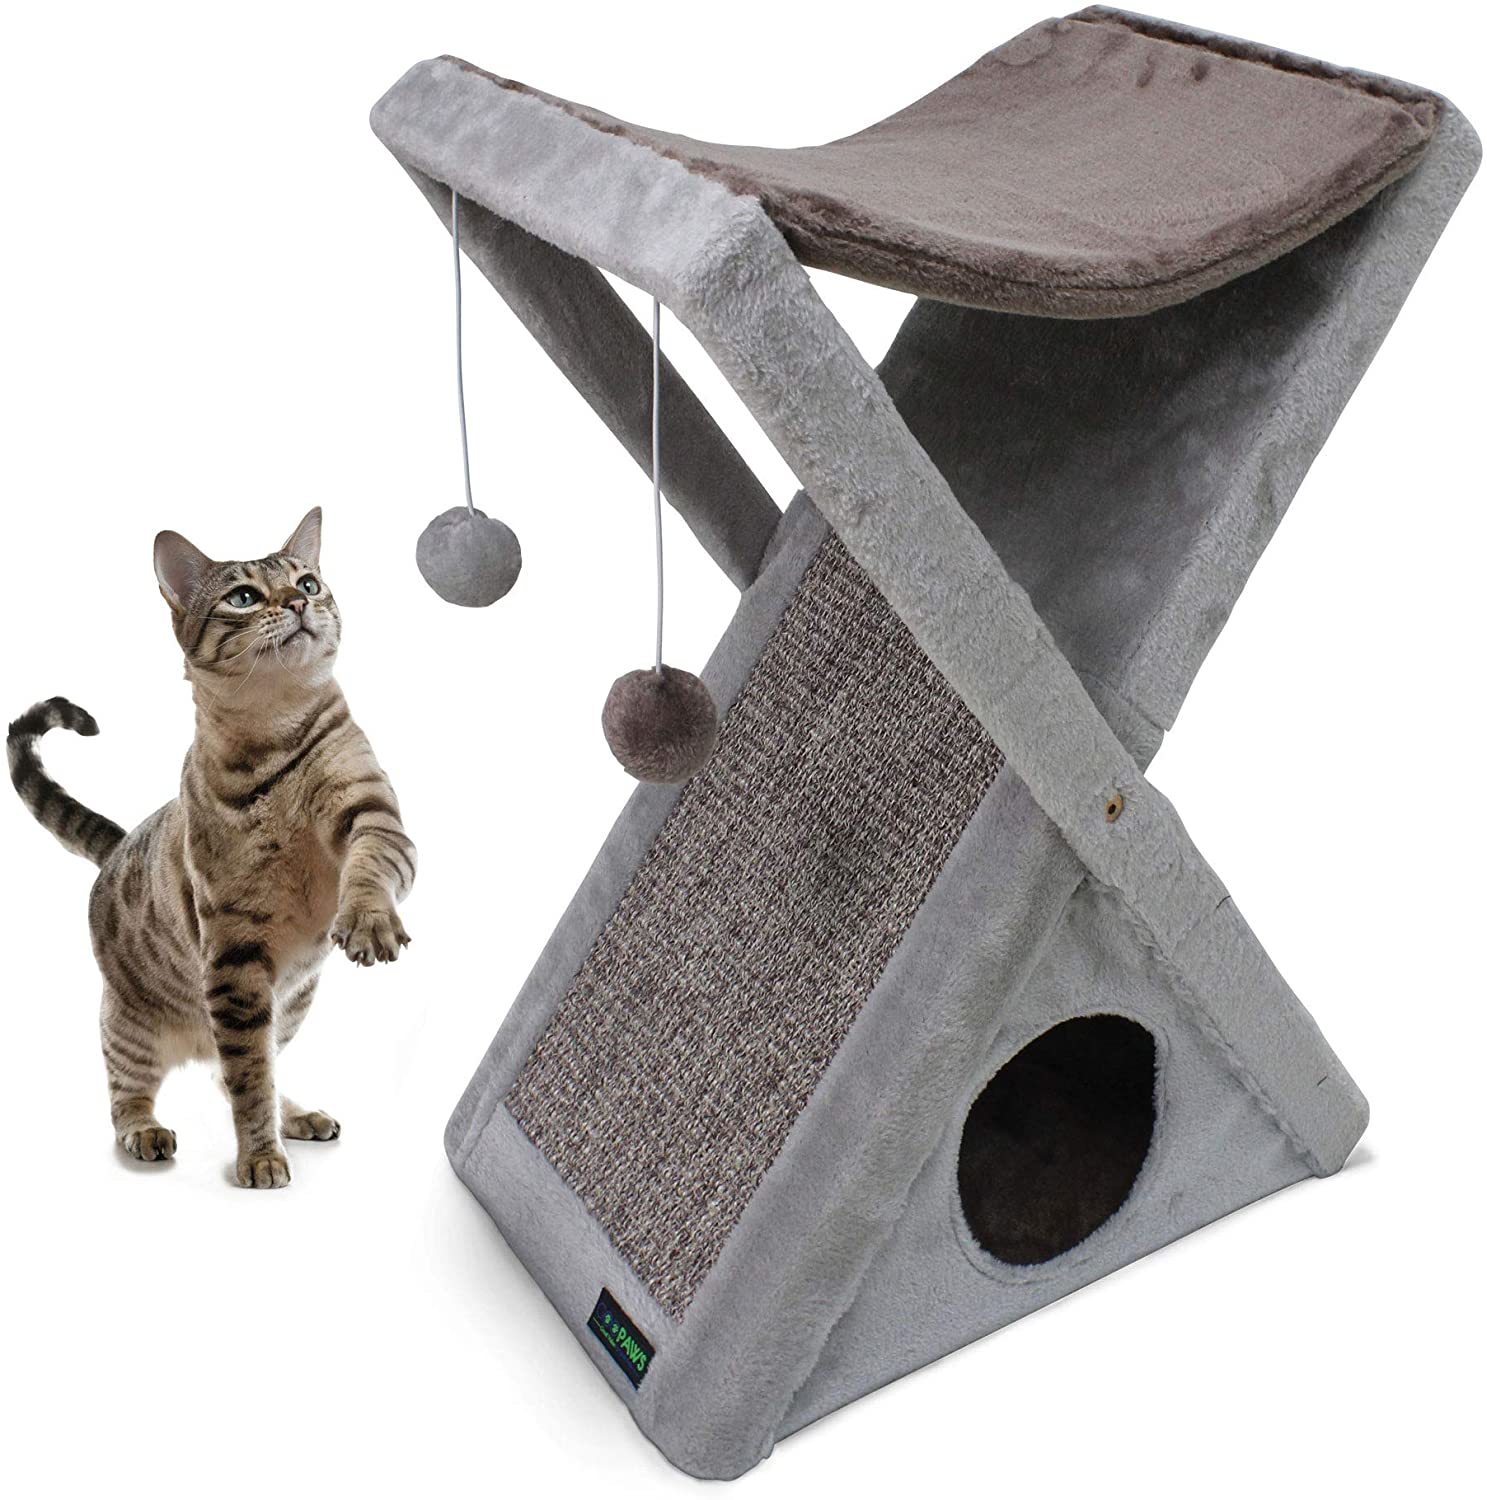 Leaps & Bounds Motorized Squirrel Cat Toy, Small